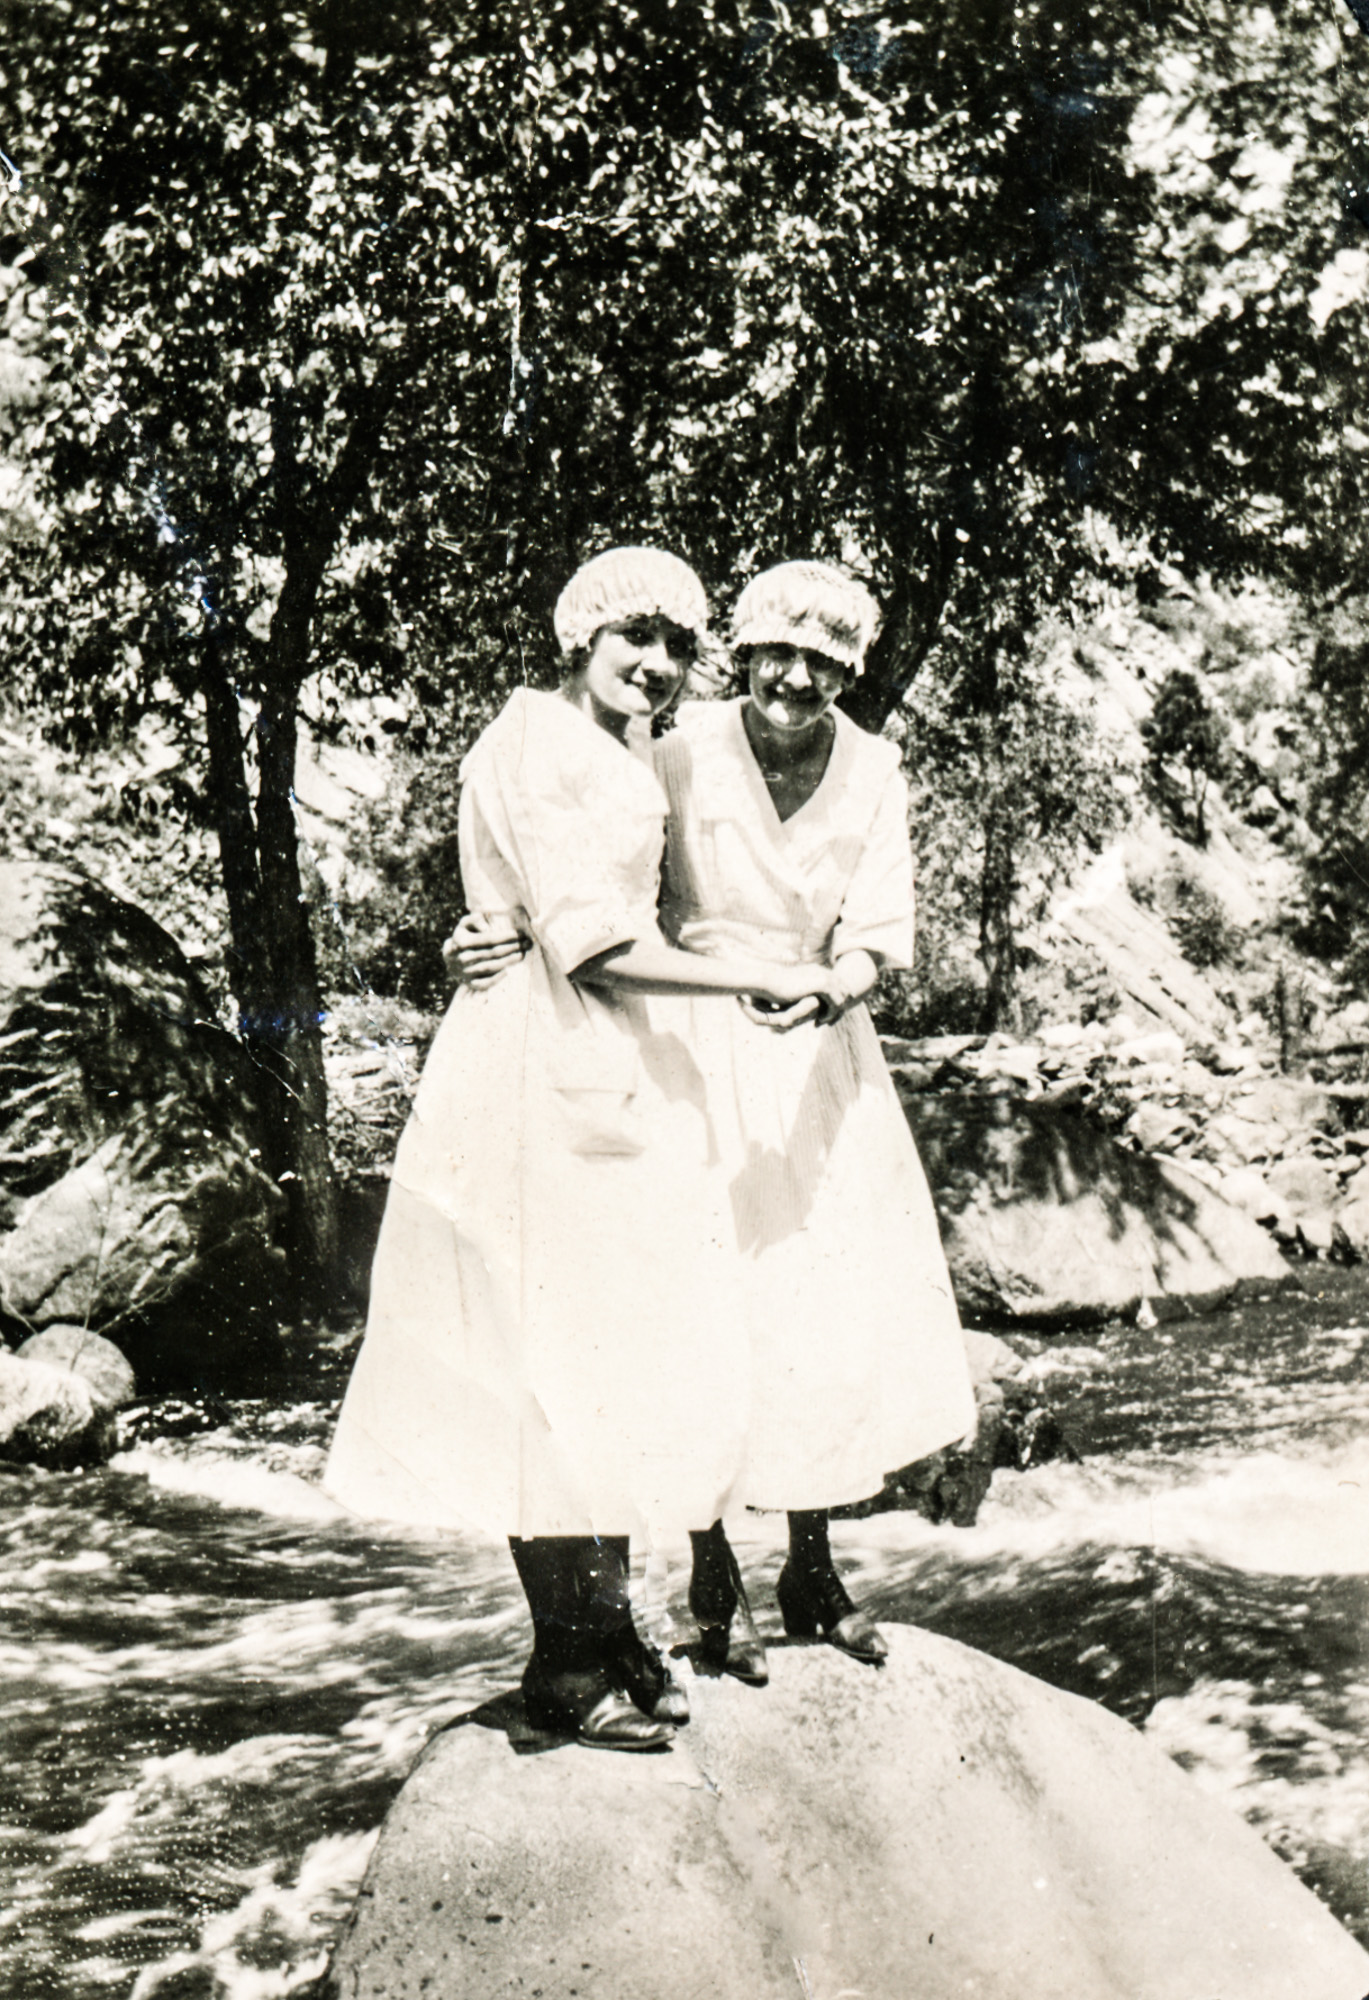 Dauth Family Archive - Circa 1920s - Elsie and Louise Dauth At Idlewild